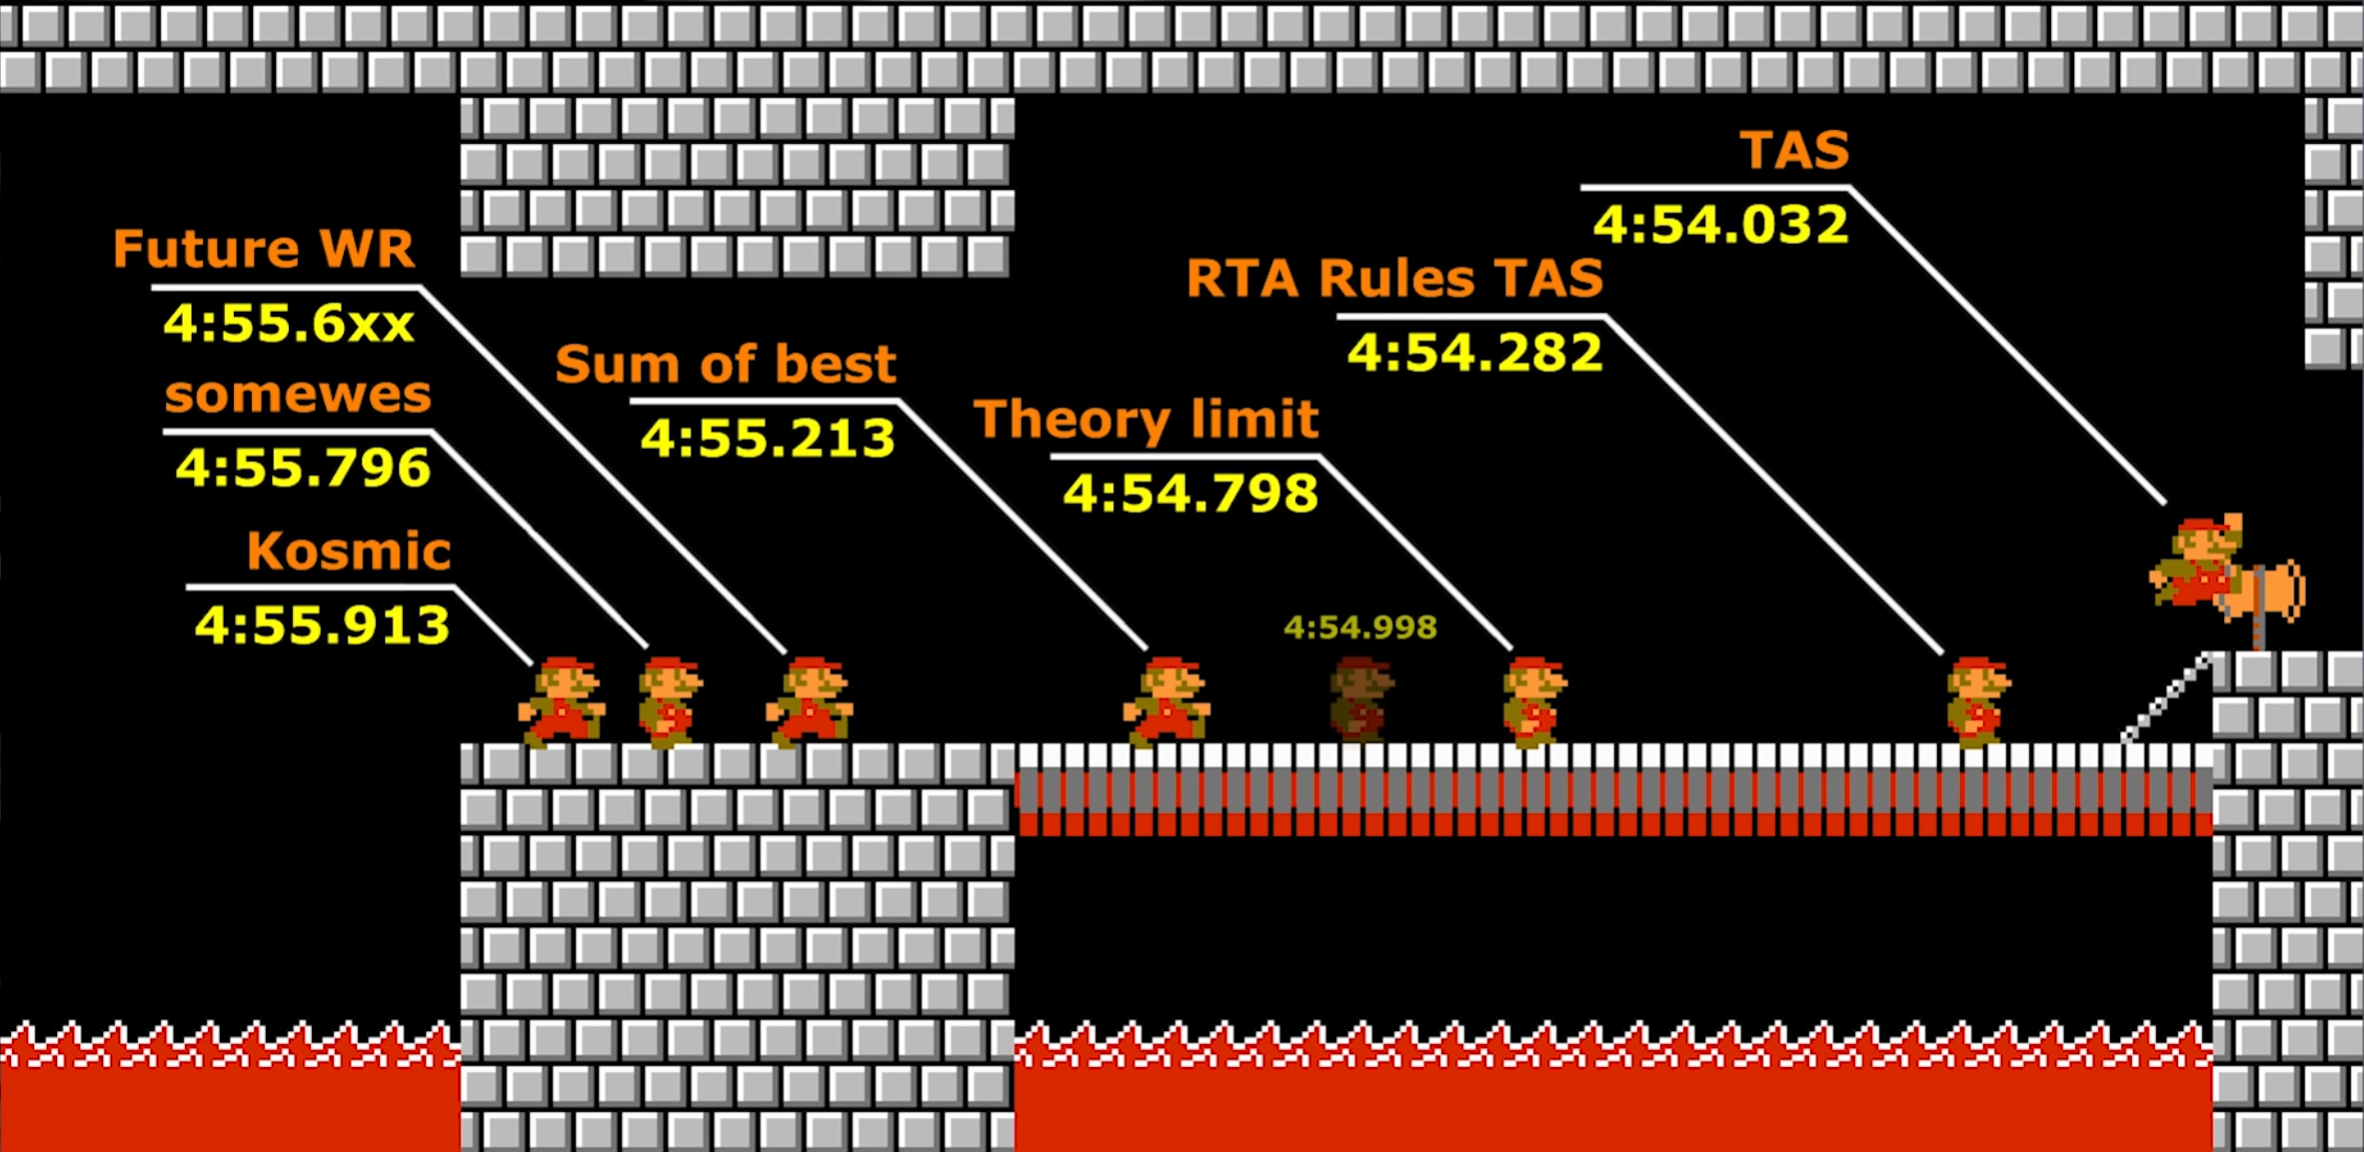 Super Mario Bros.: New world record set for beating game as quickly as  possible